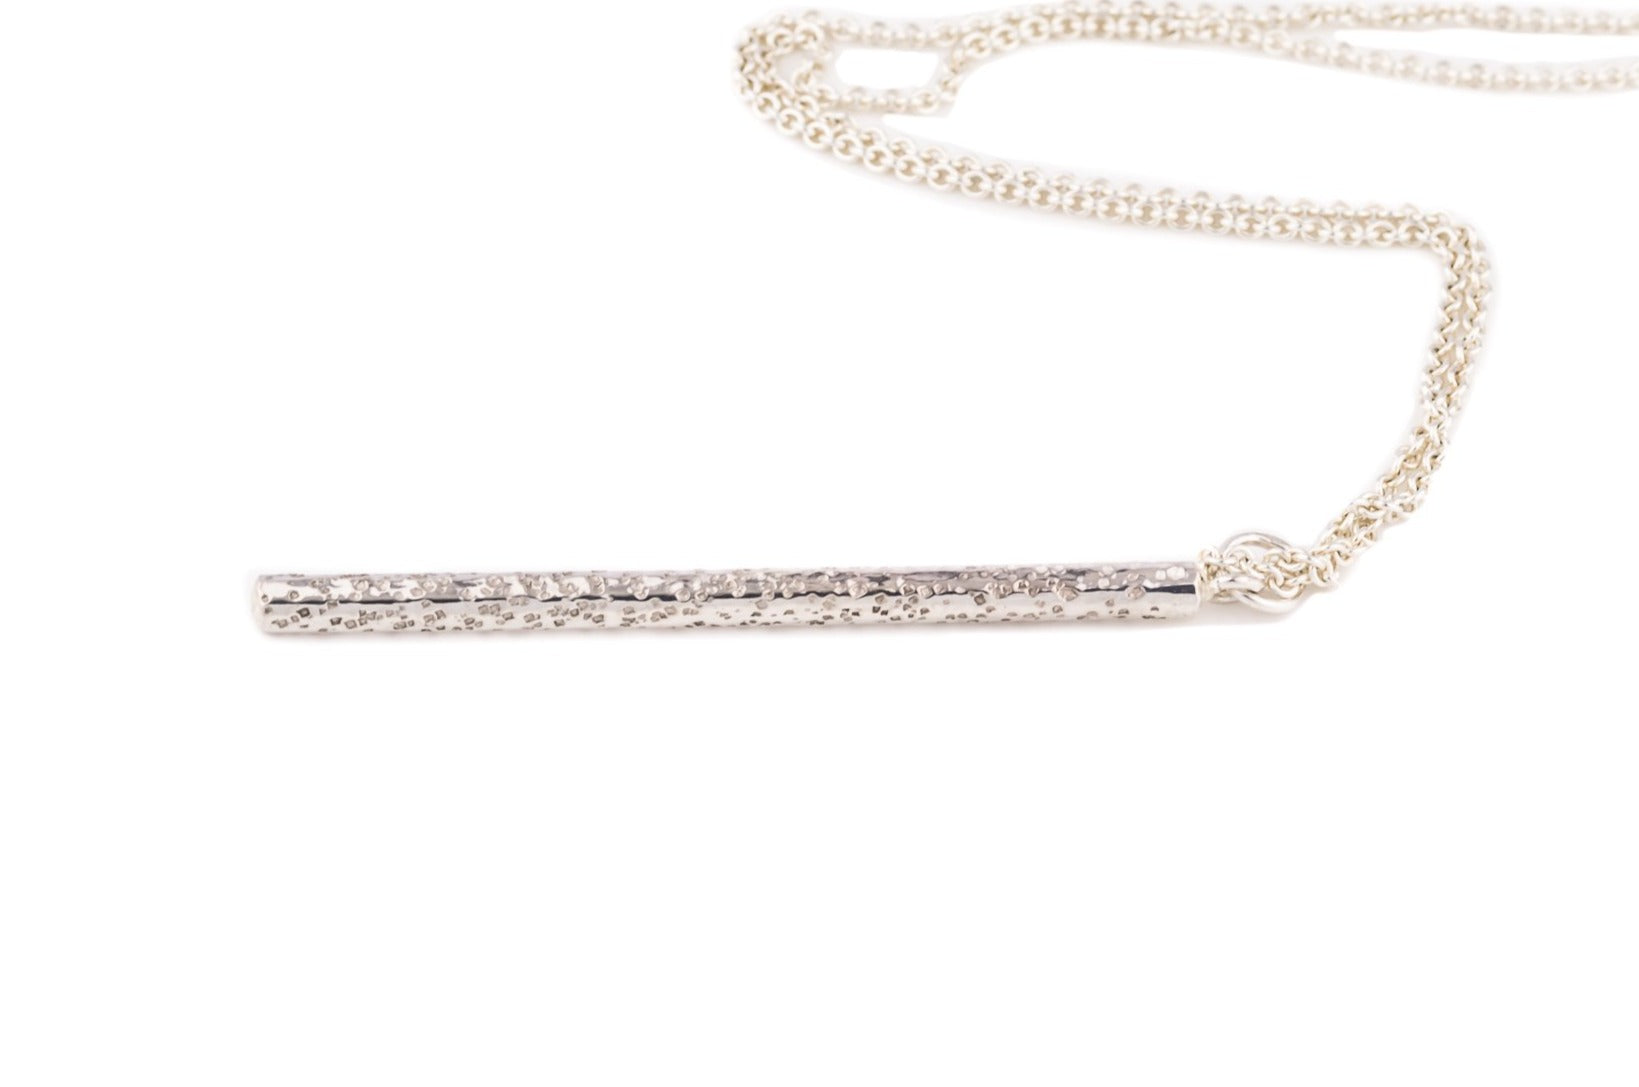 sterling silver bar pendant necklace